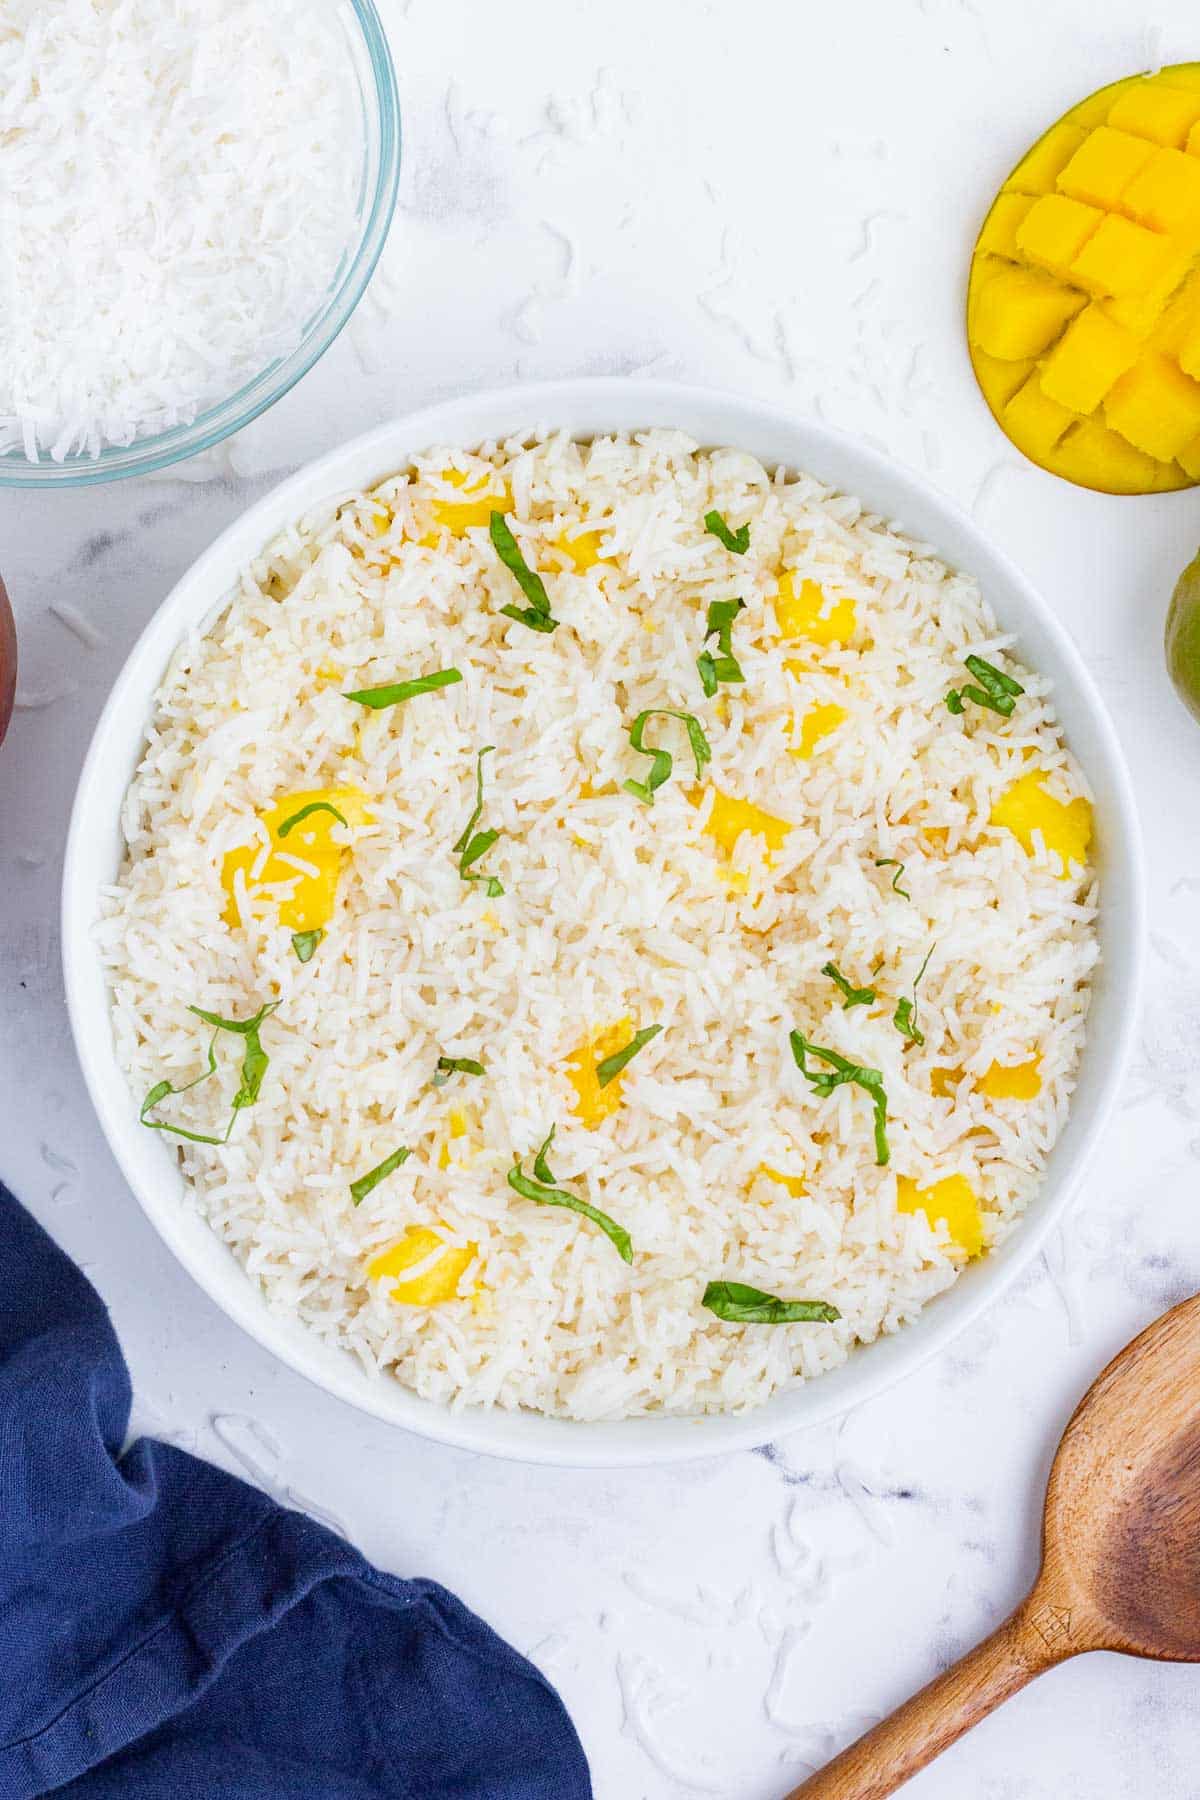 This sweet and savory rice goes perfect with spicy food.